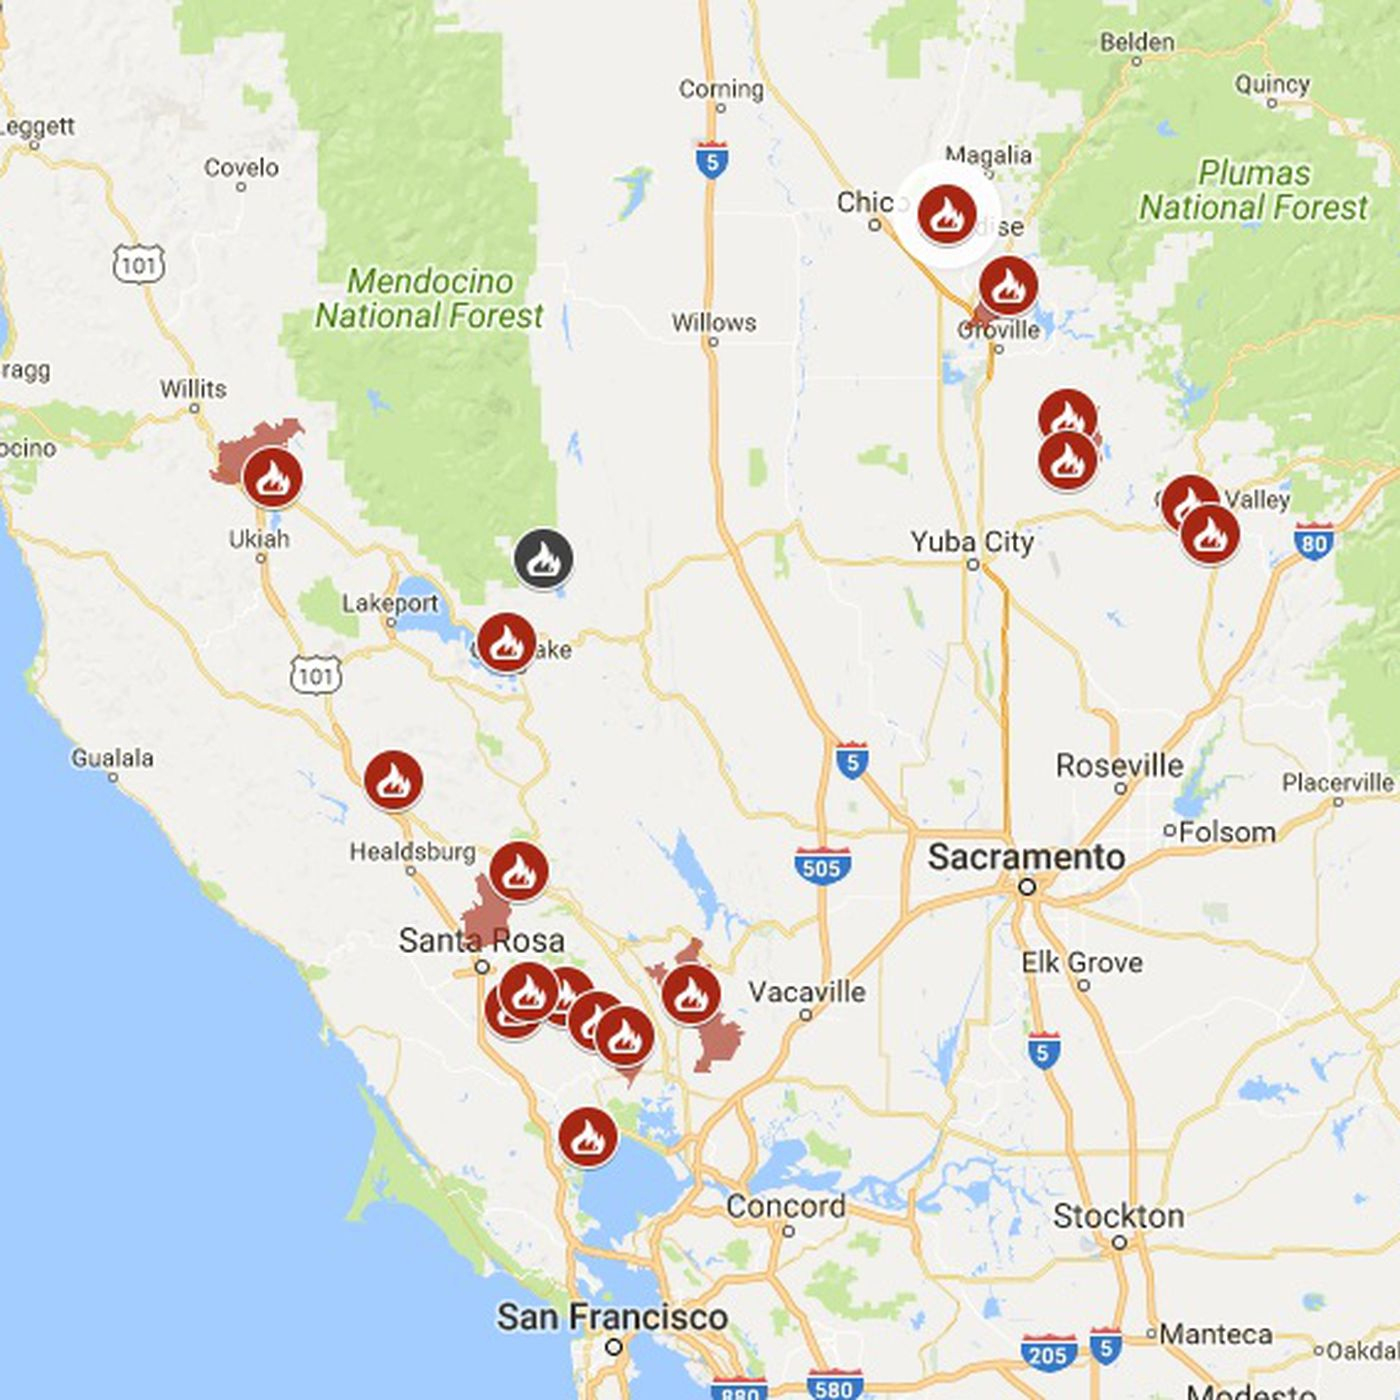 California Fires 2018 Map From Art En Provence 5 - Ameliabd - California Wildfires 2018 Map